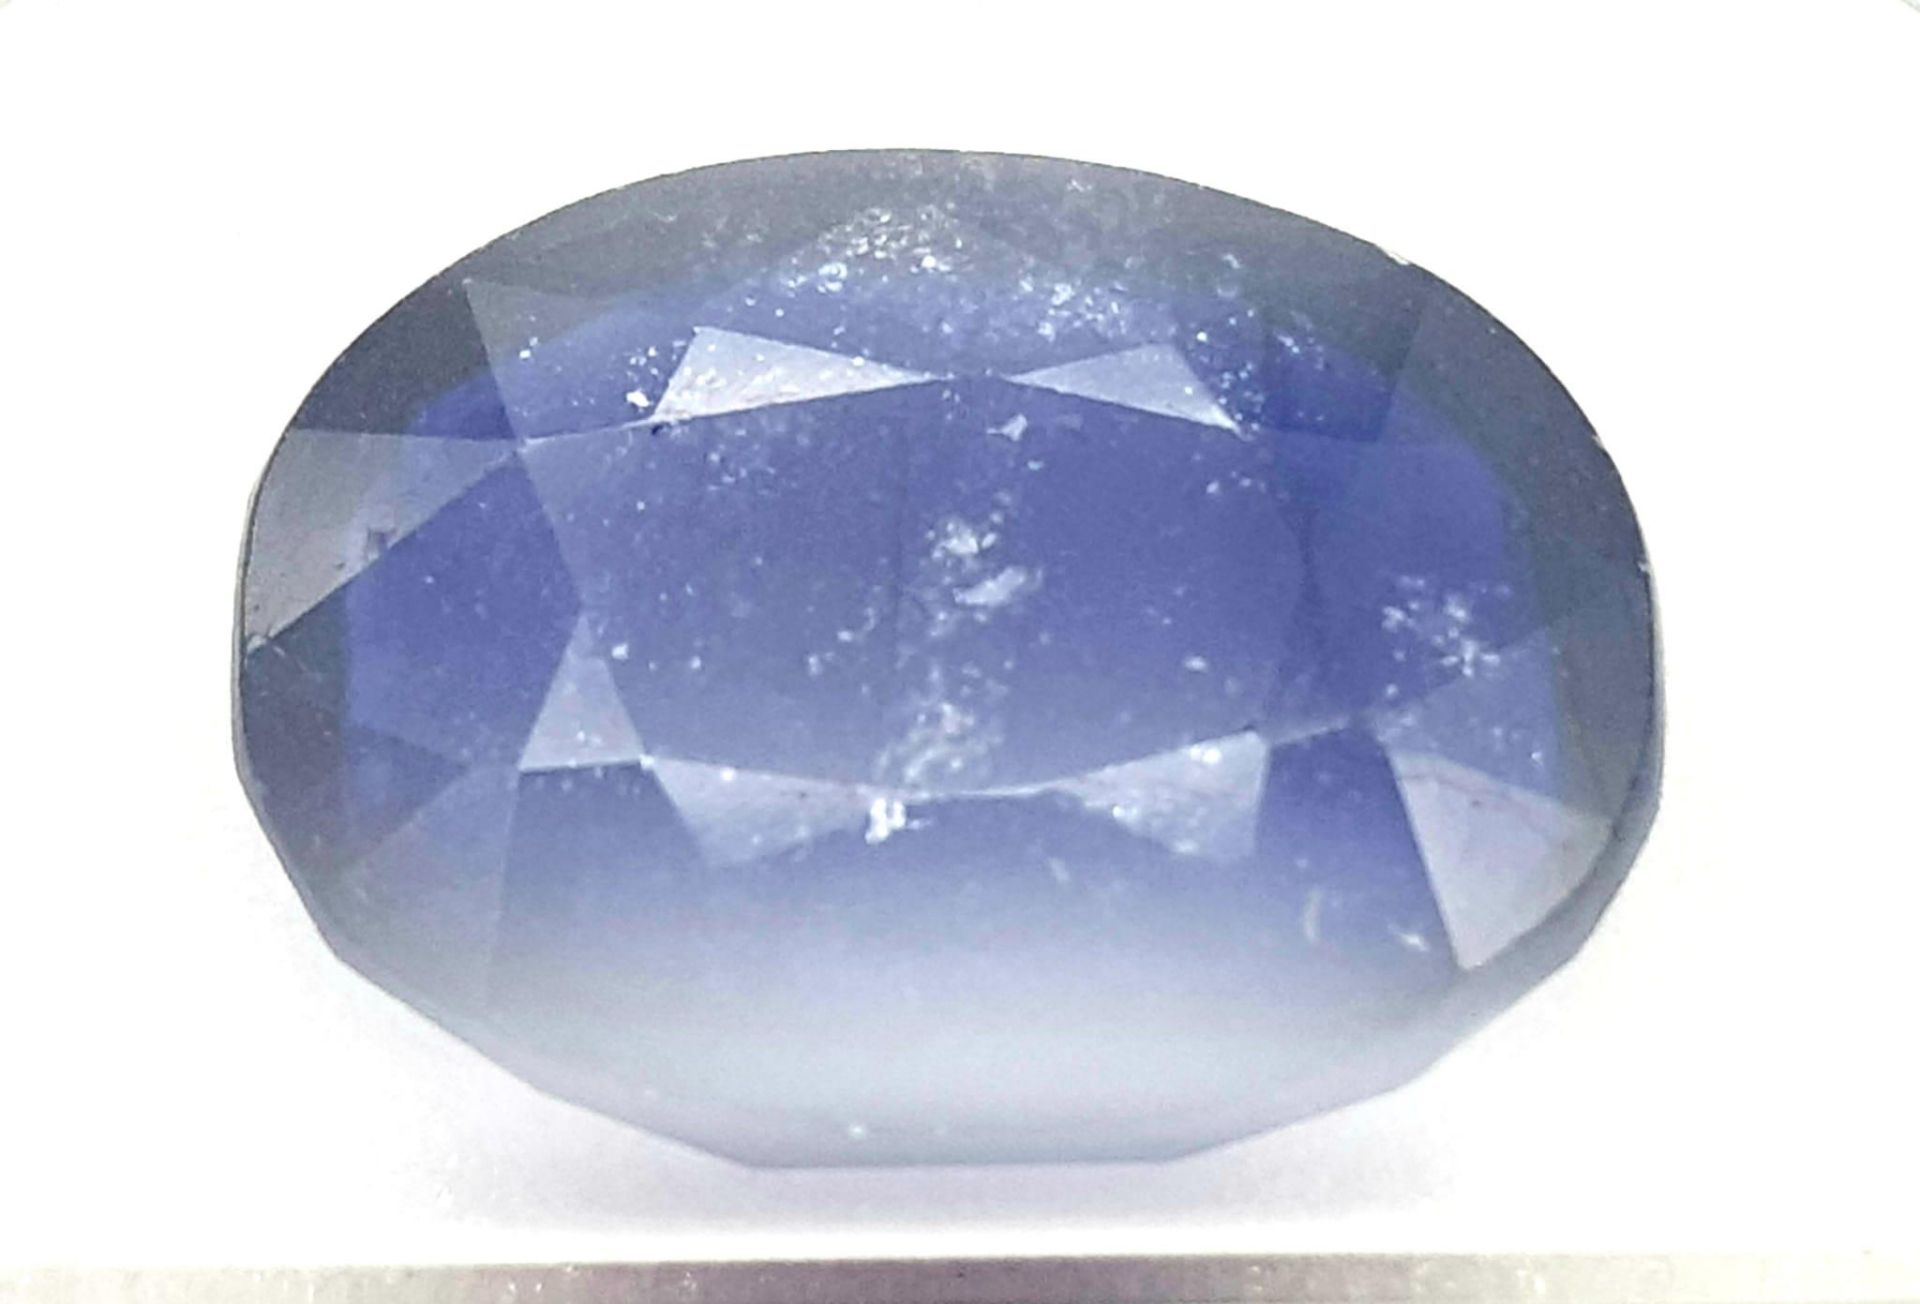 An 11.35ct Blue Sapphire - AIG Milan Certified in a Sealed Container.